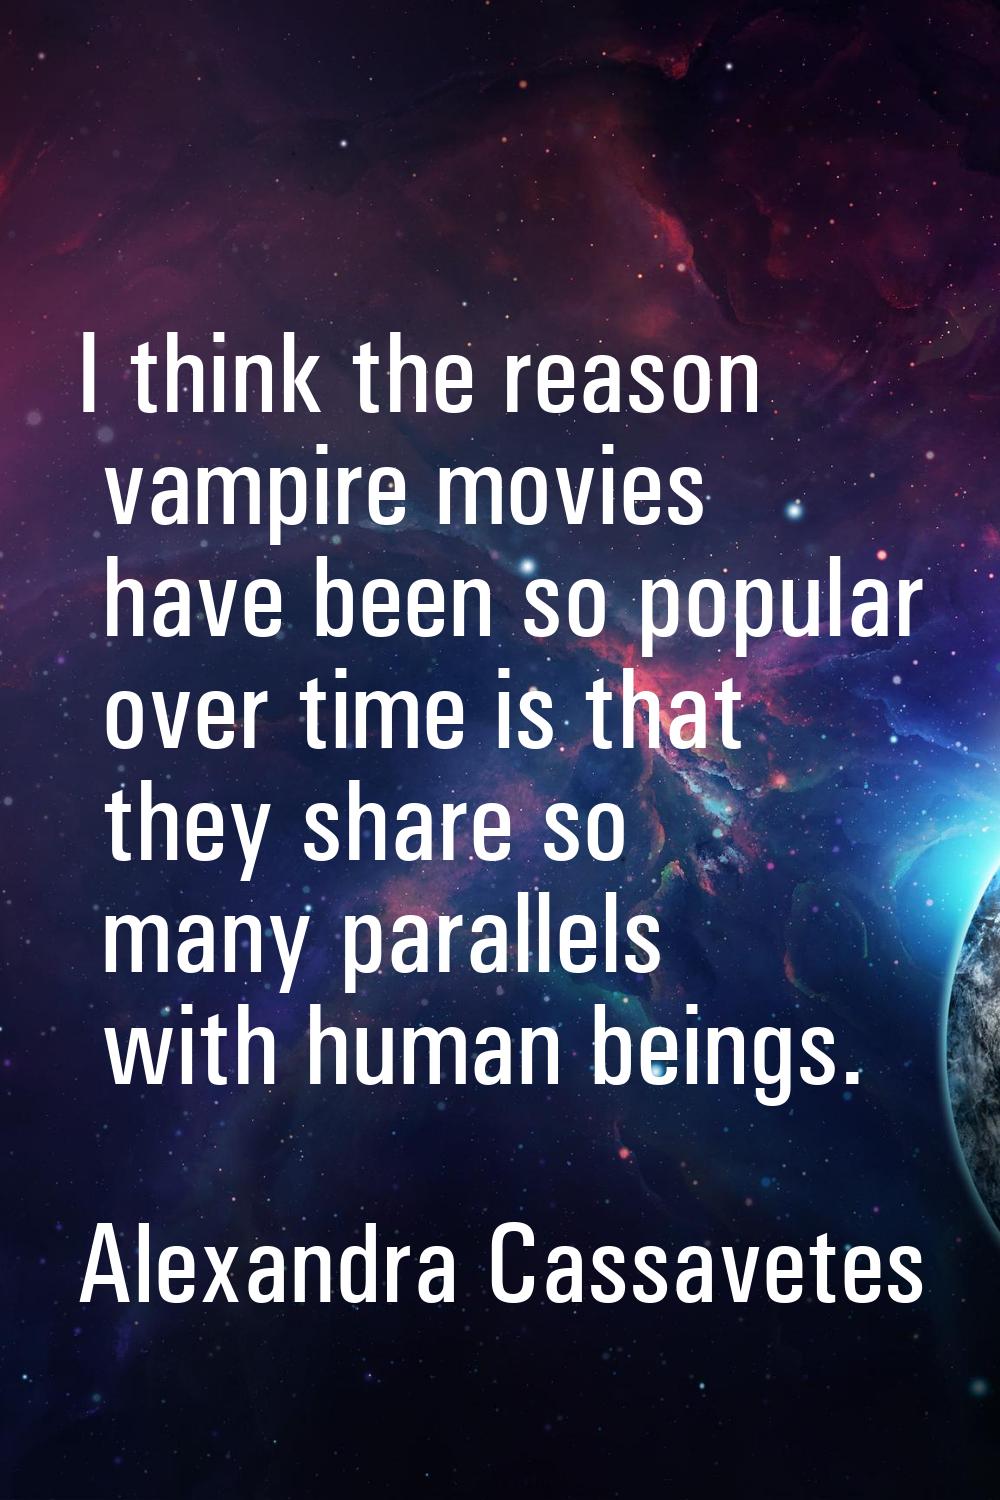 I think the reason vampire movies have been so popular over time is that they share so many paralle